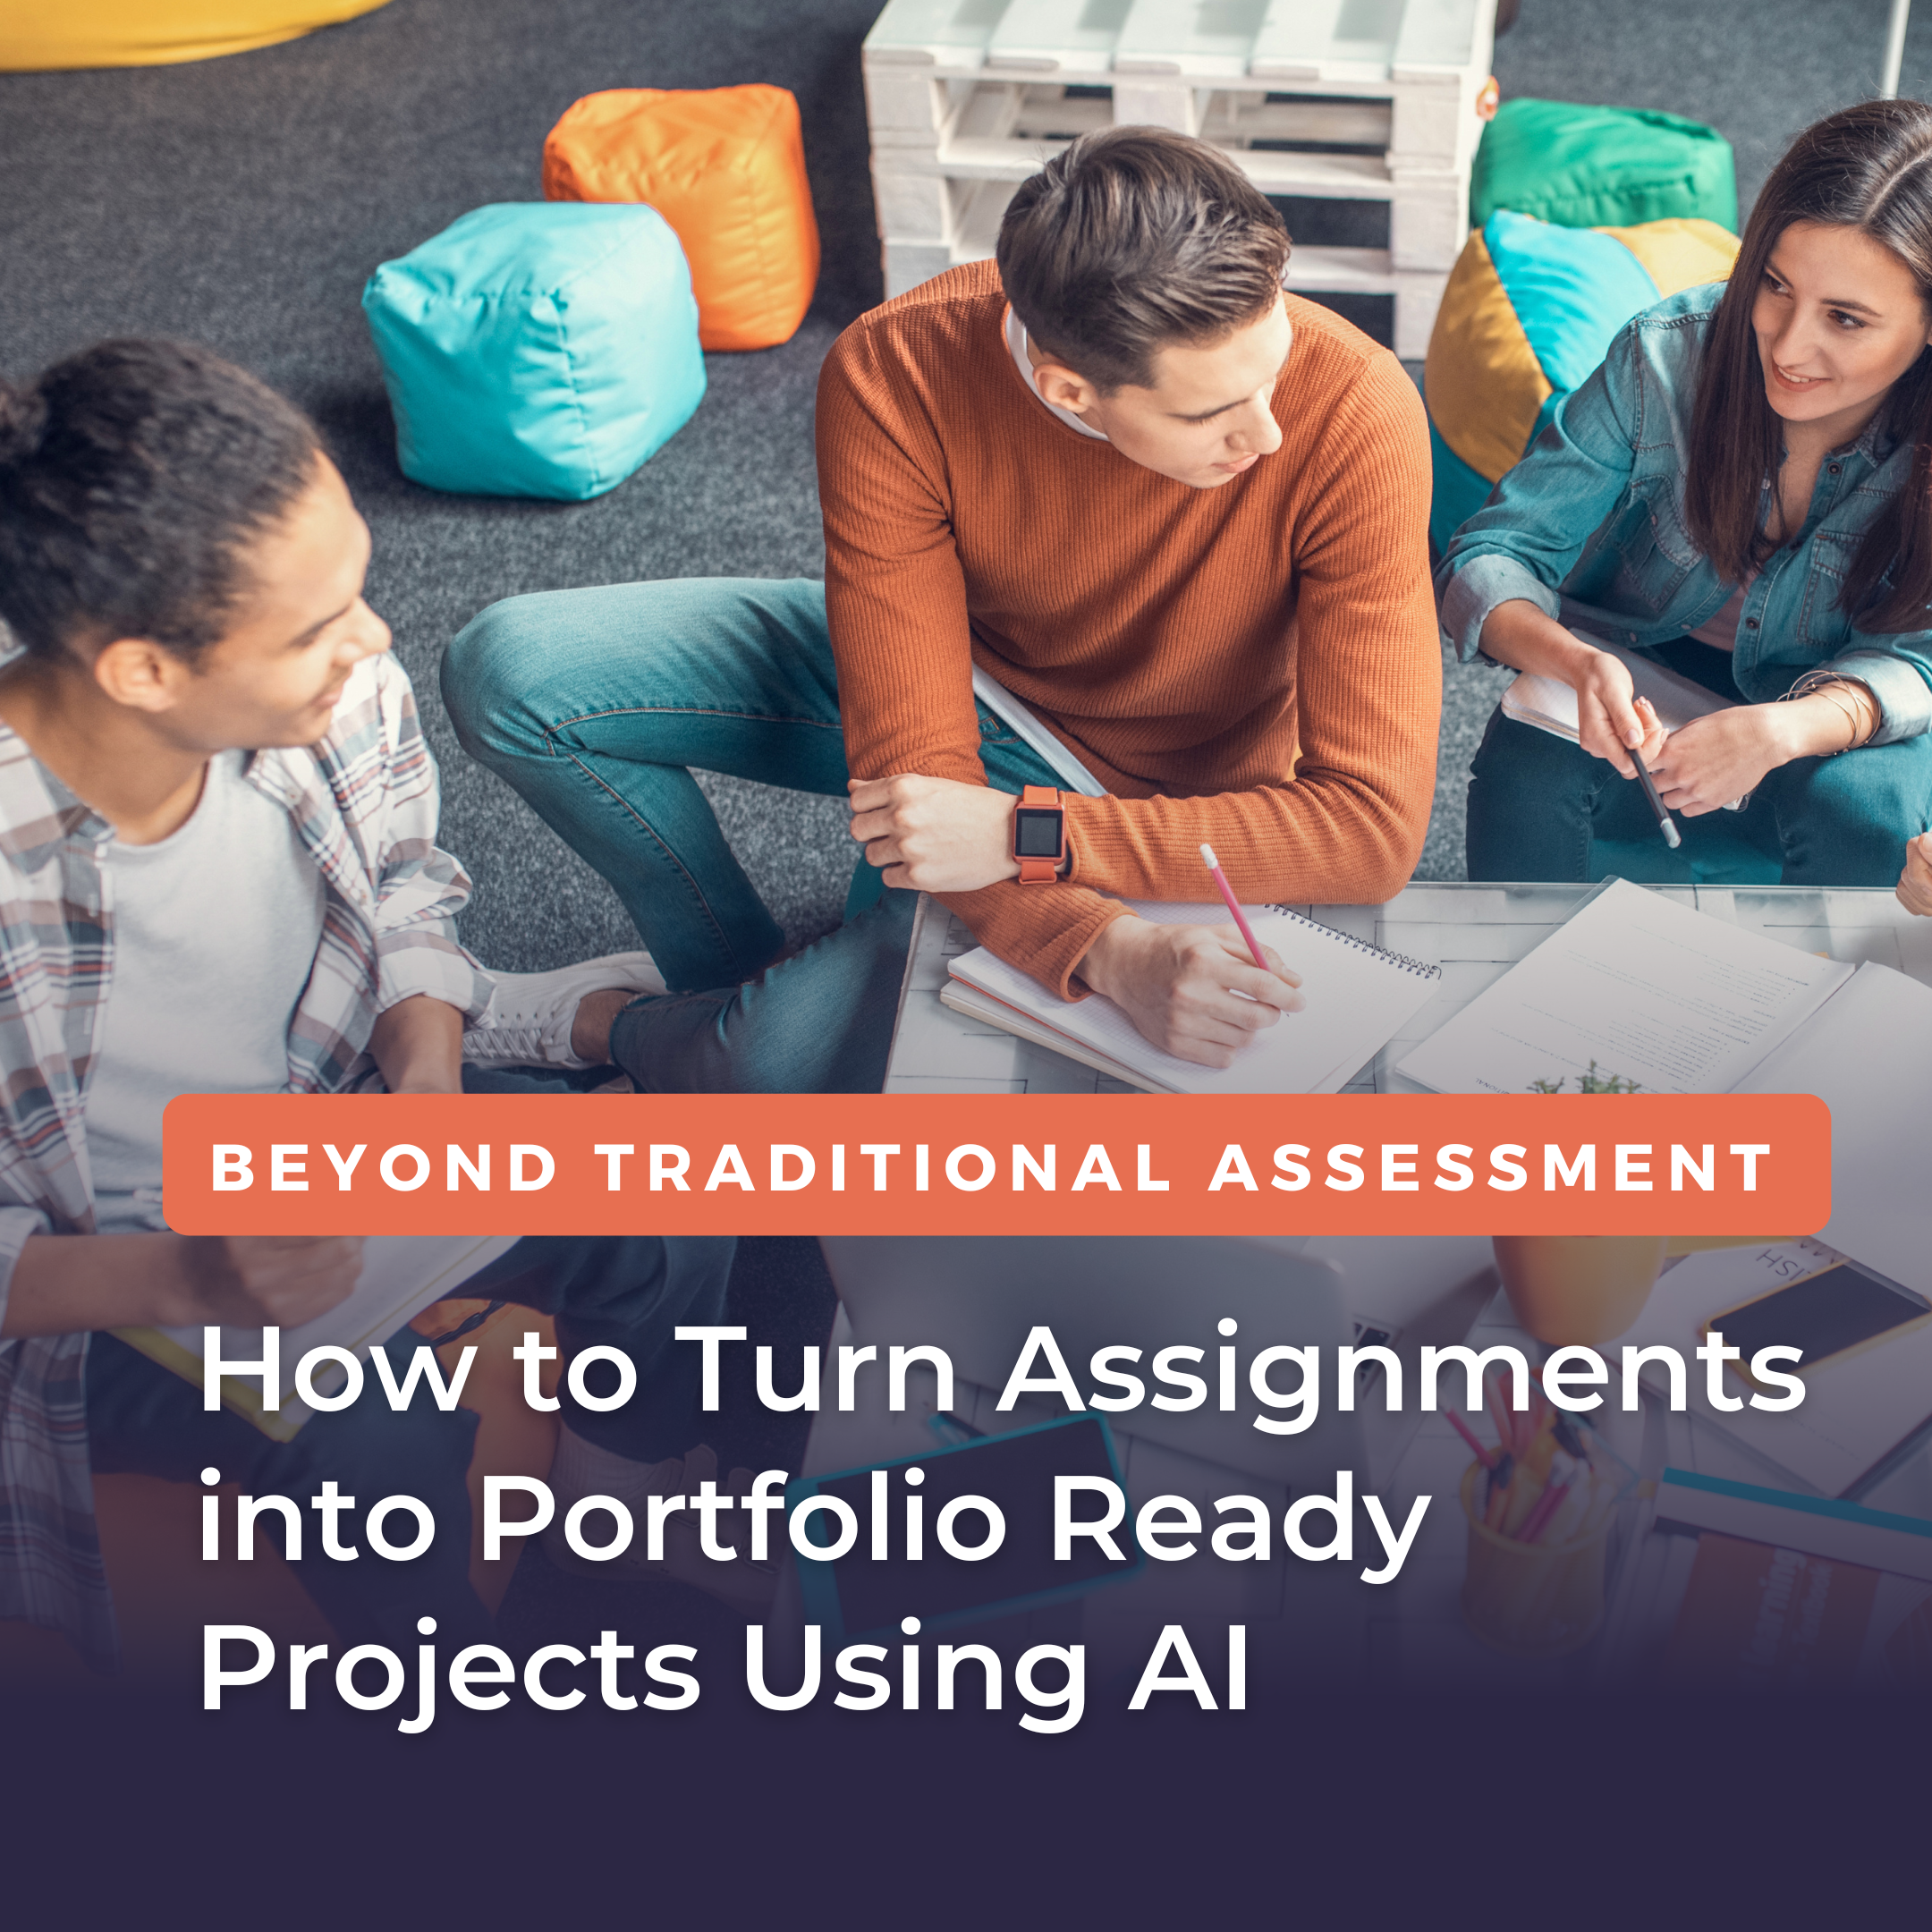 How to Turn Assignments into Portfolio-Ready Projects Using AI